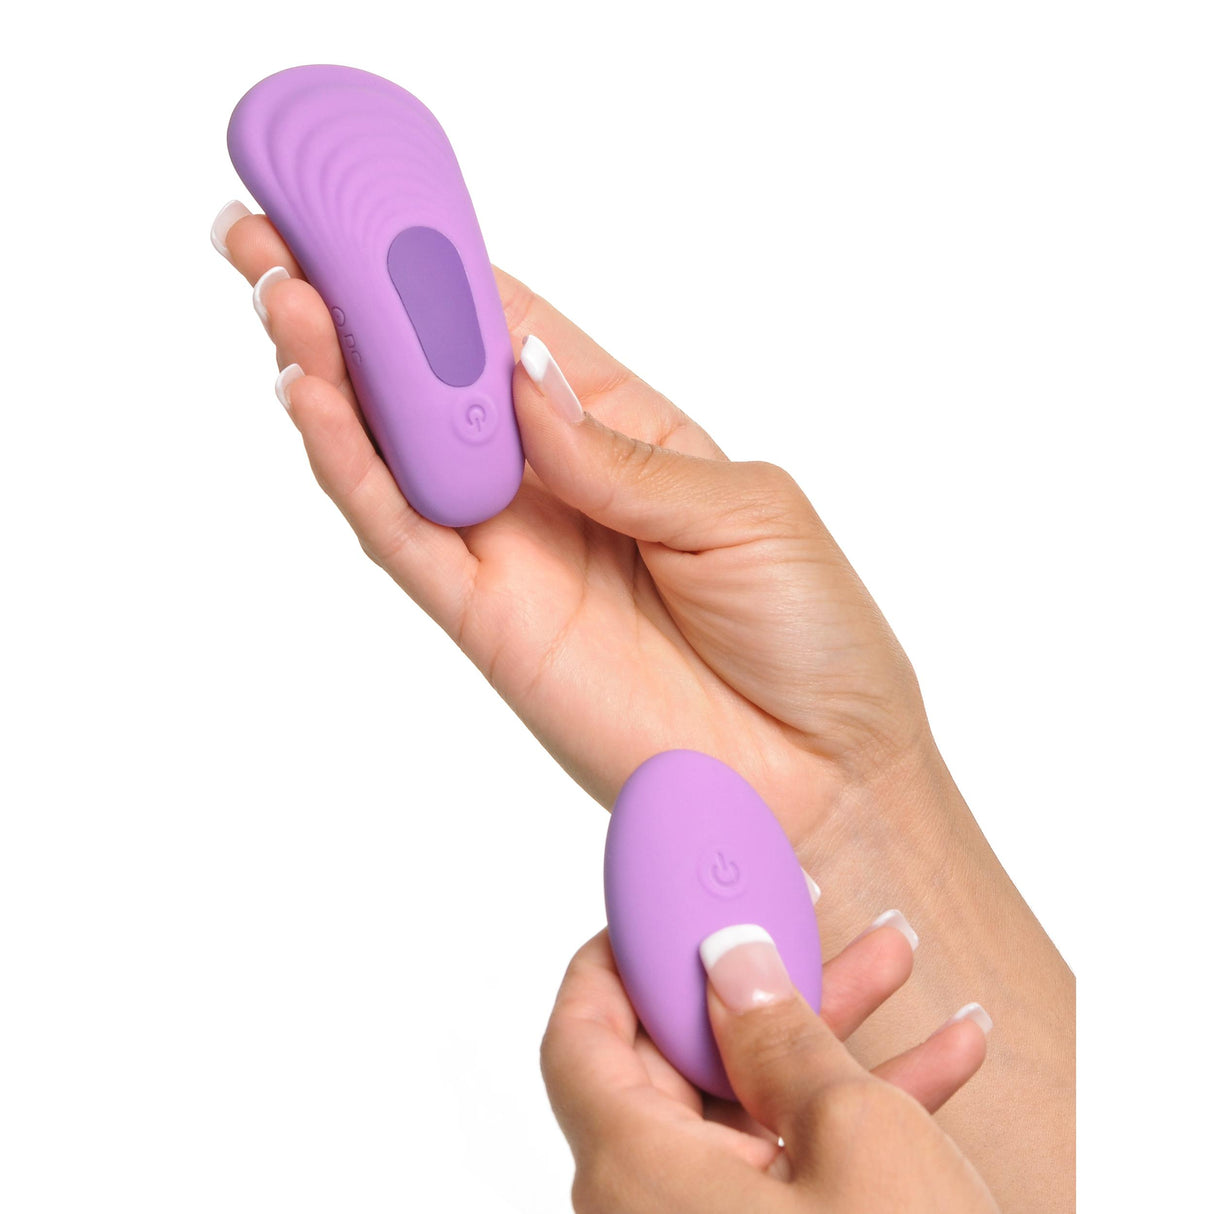 Fantasy For Her Remote Silicone Please-Her